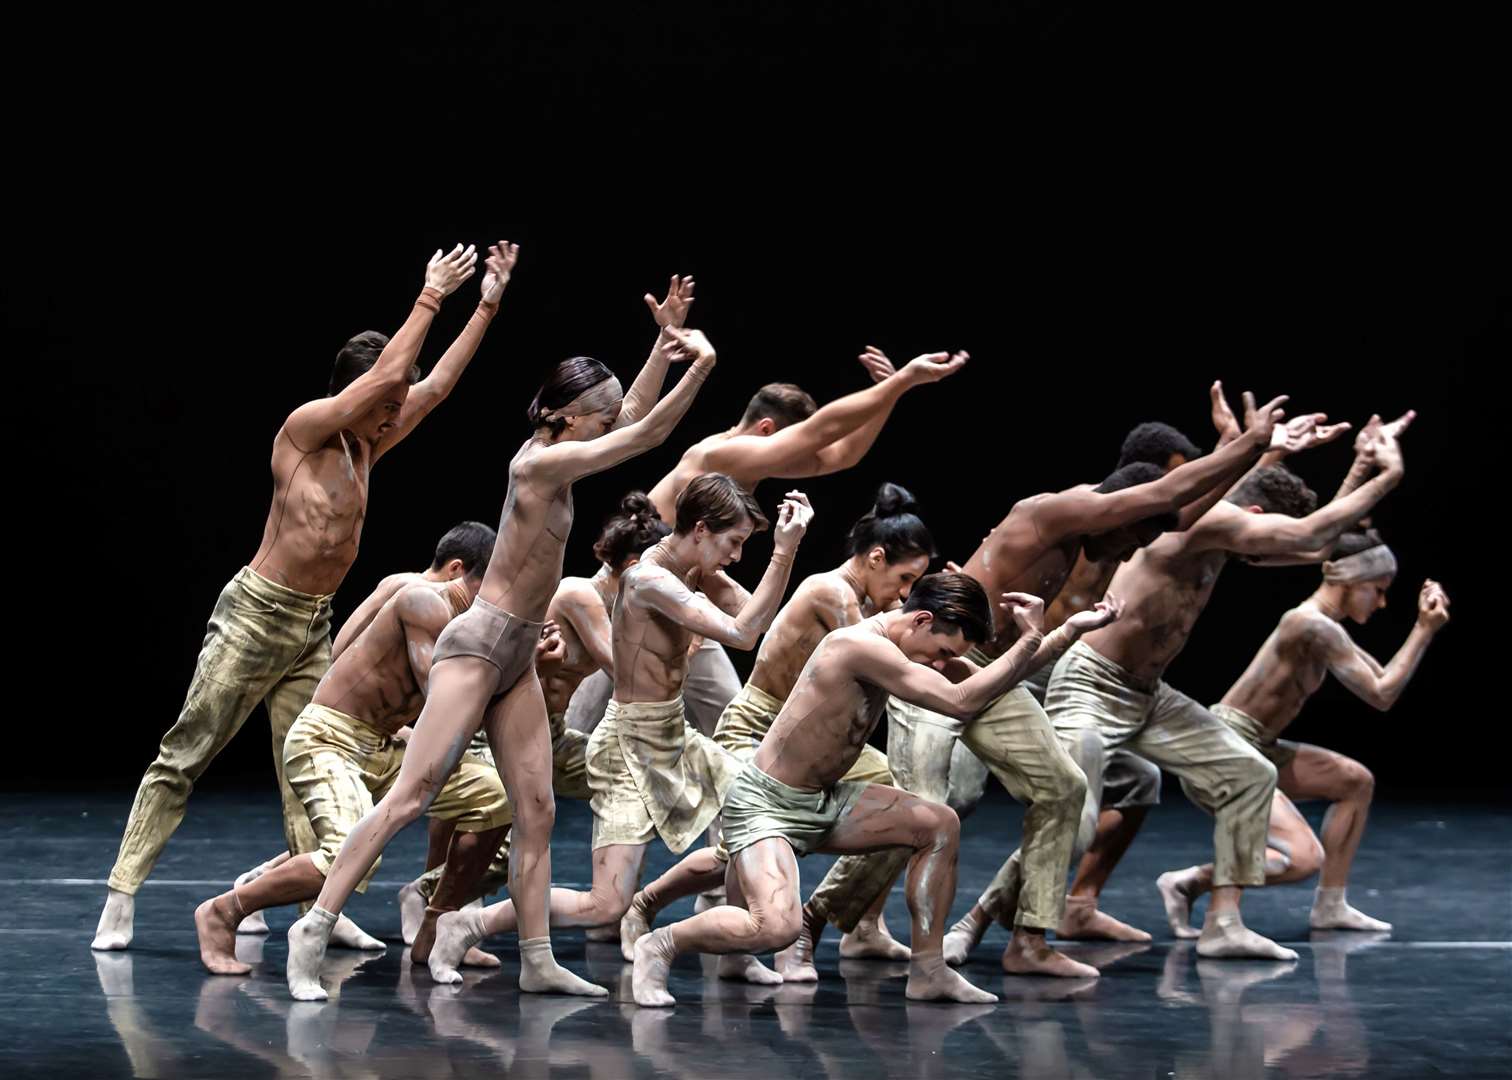 During the first act, the group of dancers often moved as one. Picture: Iari Davies